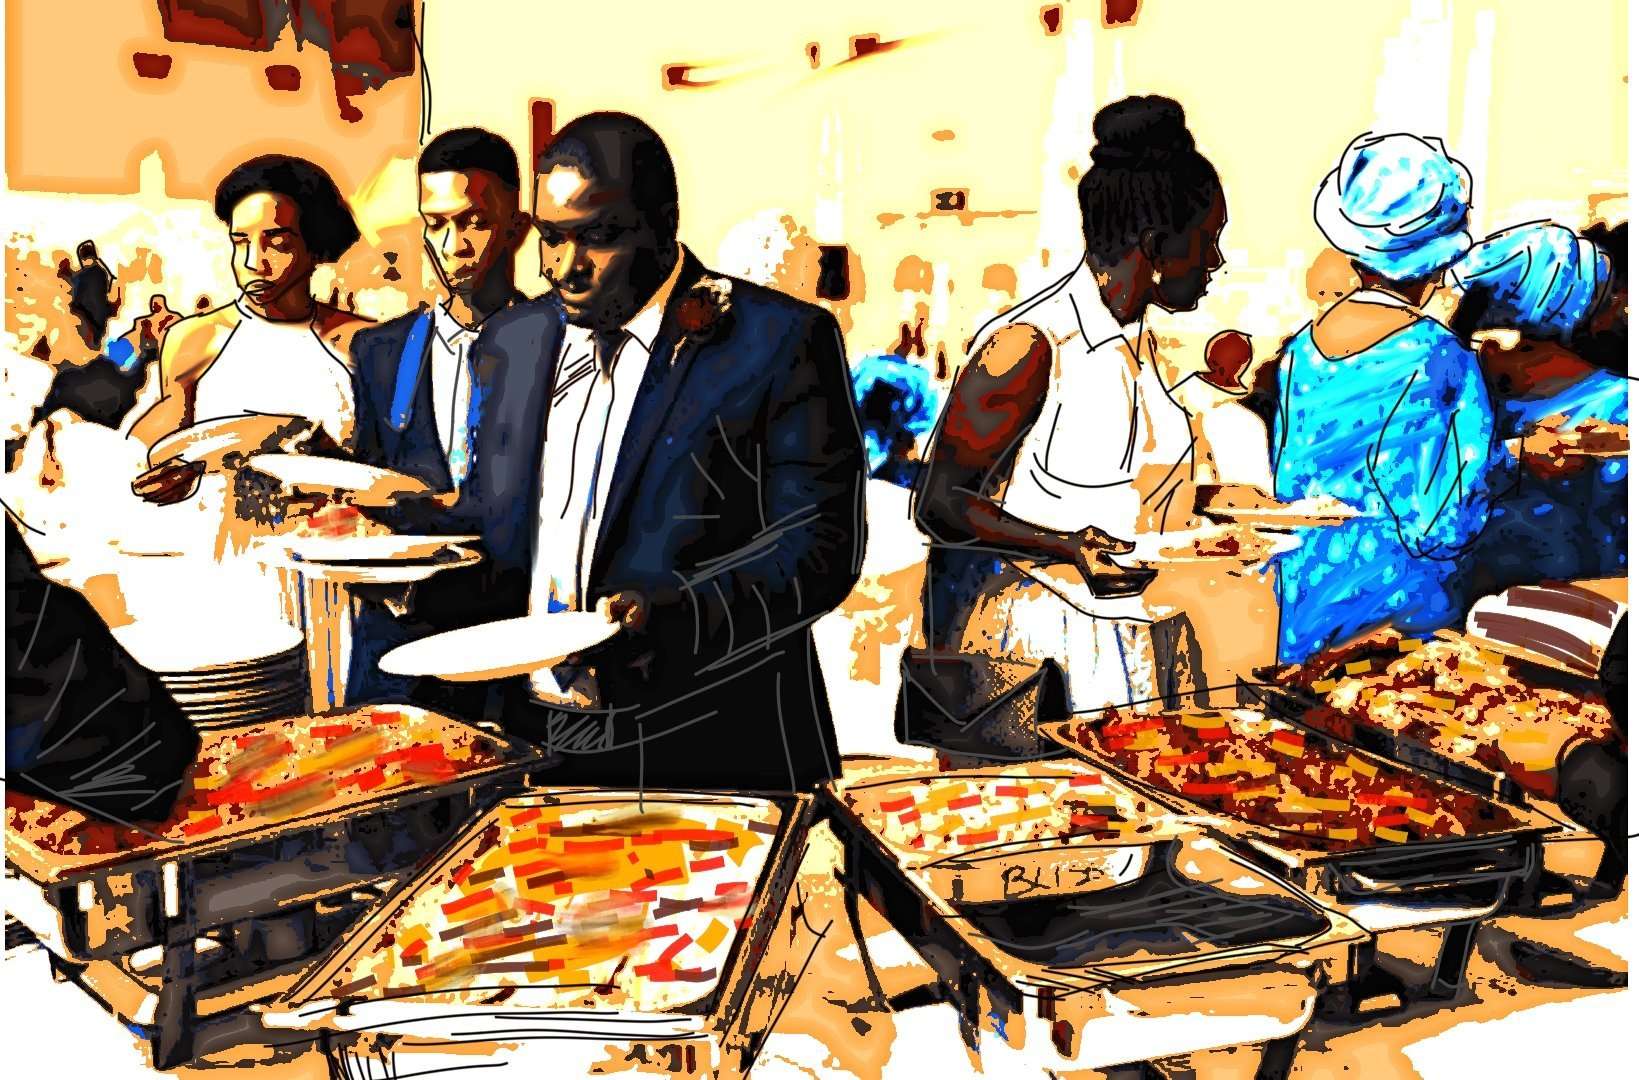 Food sharing time in Nigerian parties is the climax